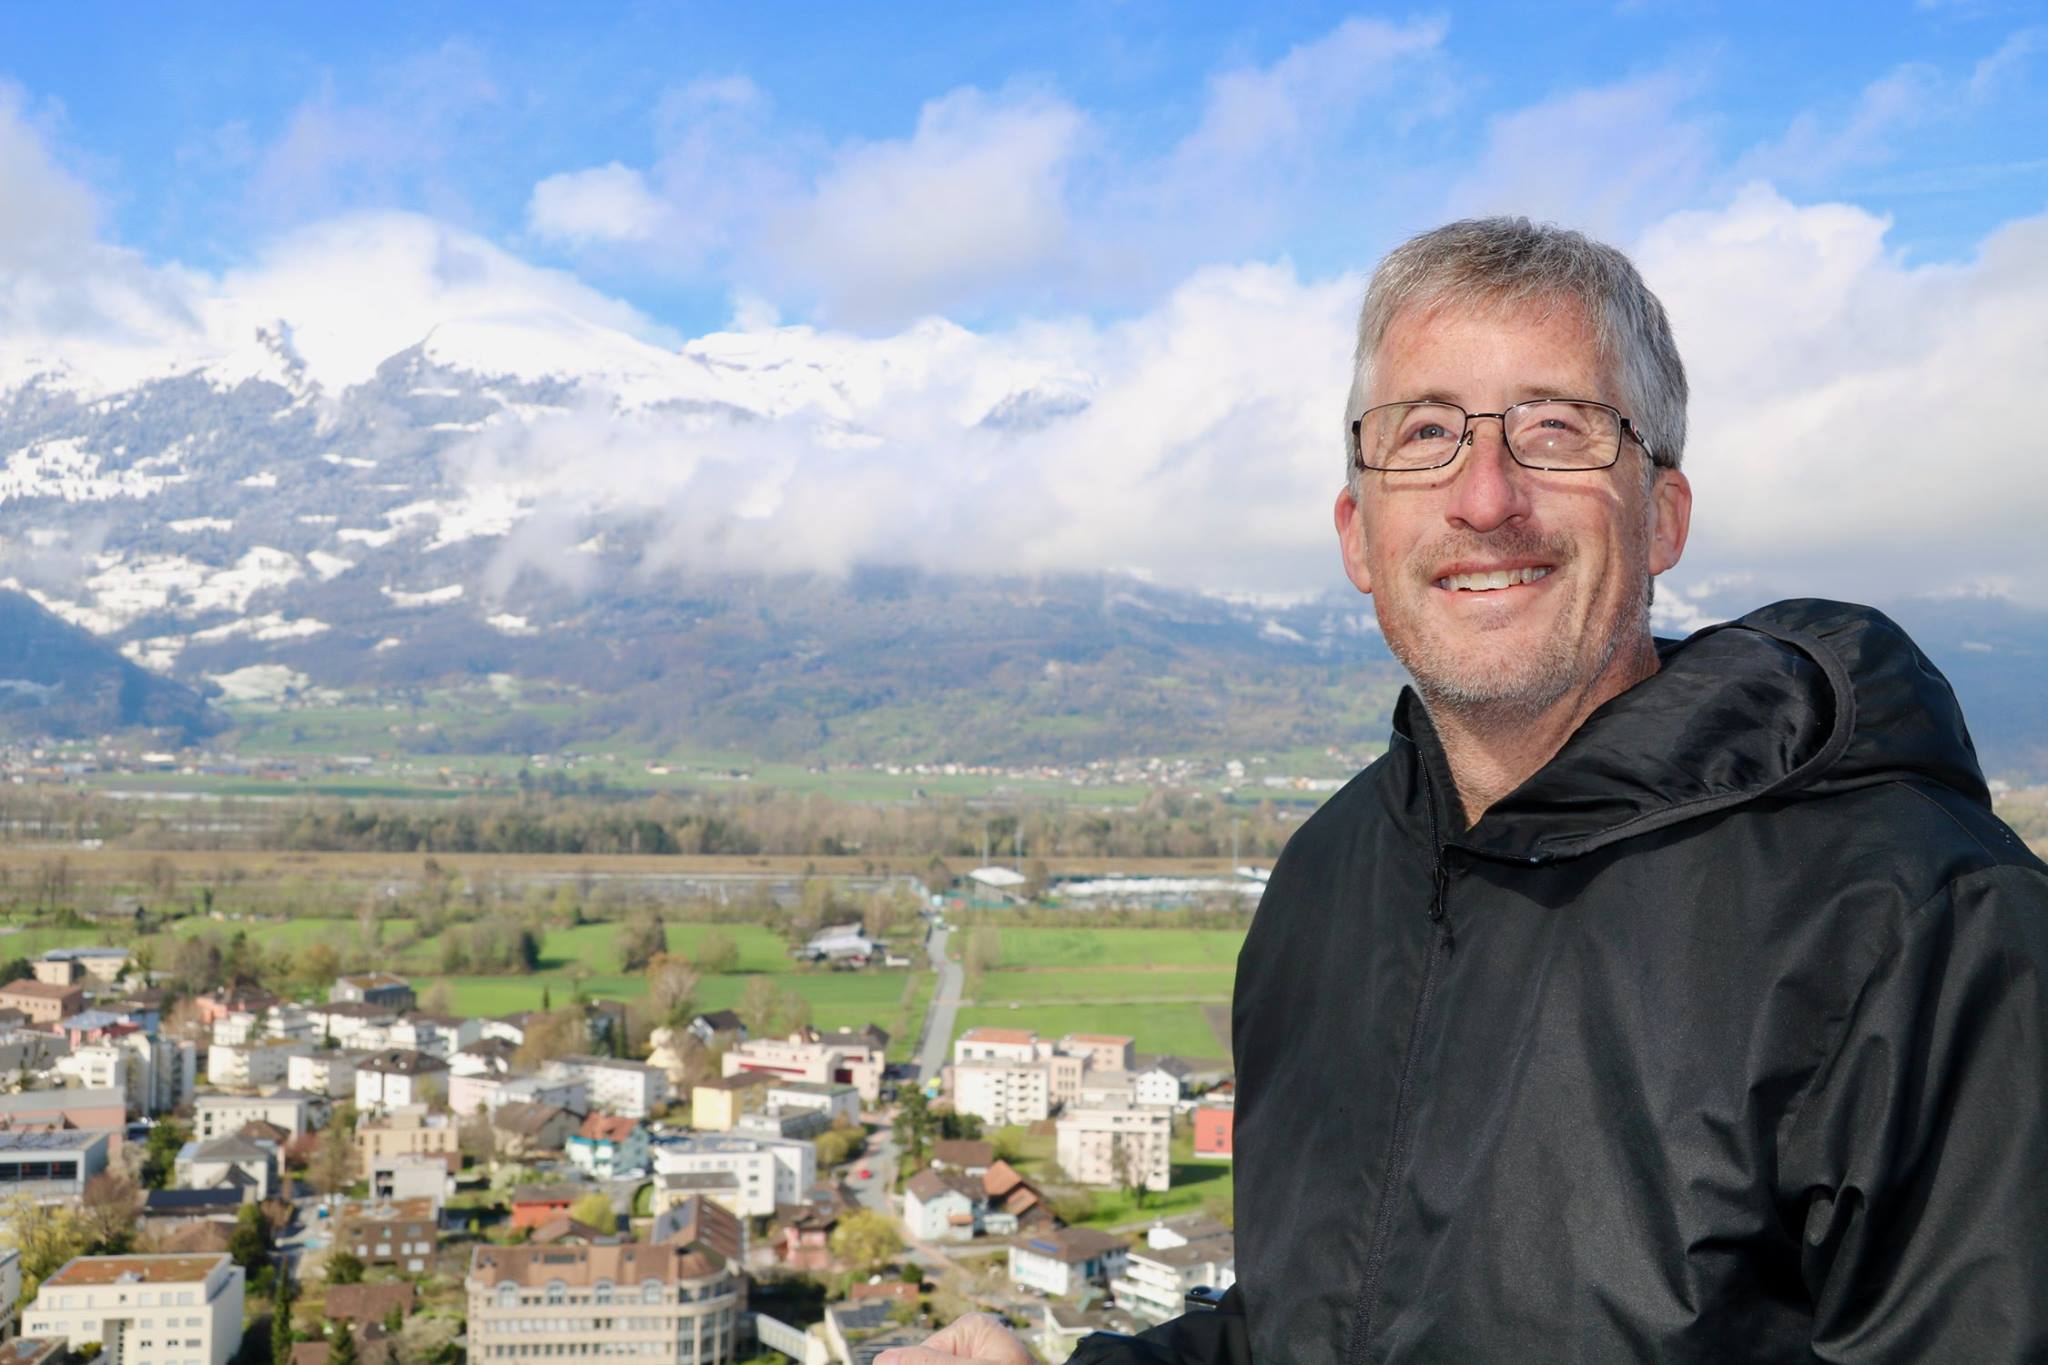 Dave Brill standings in front of Austrian Alps